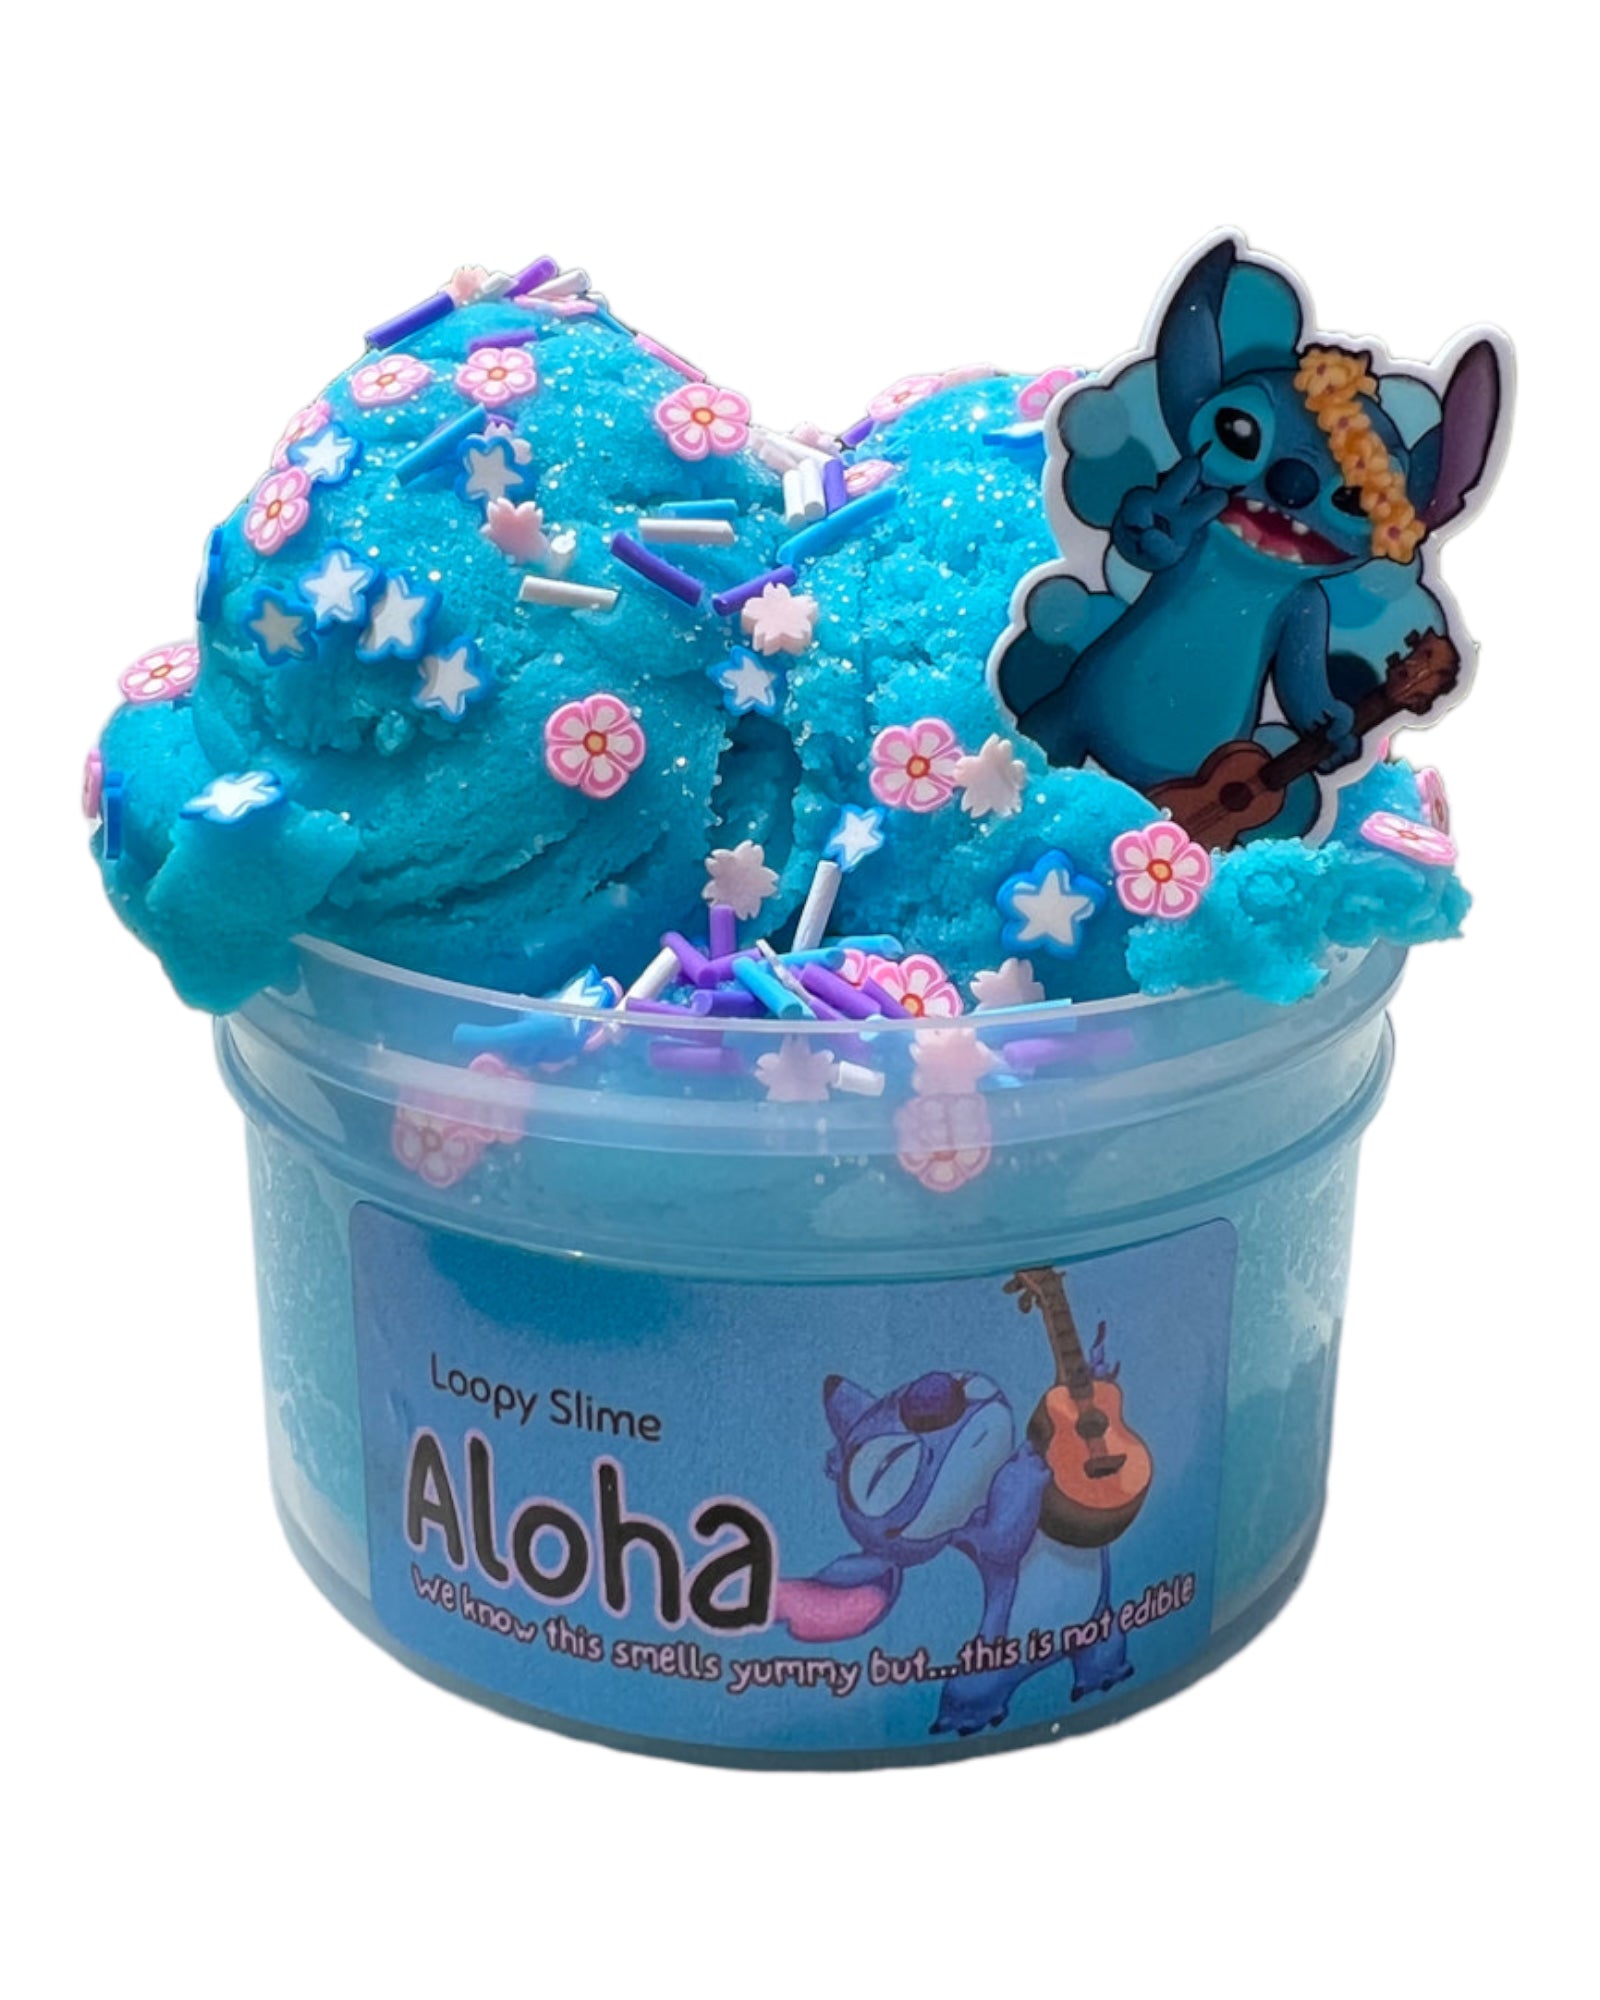 Fluffy and moldable Cloud dough, sensory slime, slime for kids and adults, scented slime, stitch slime